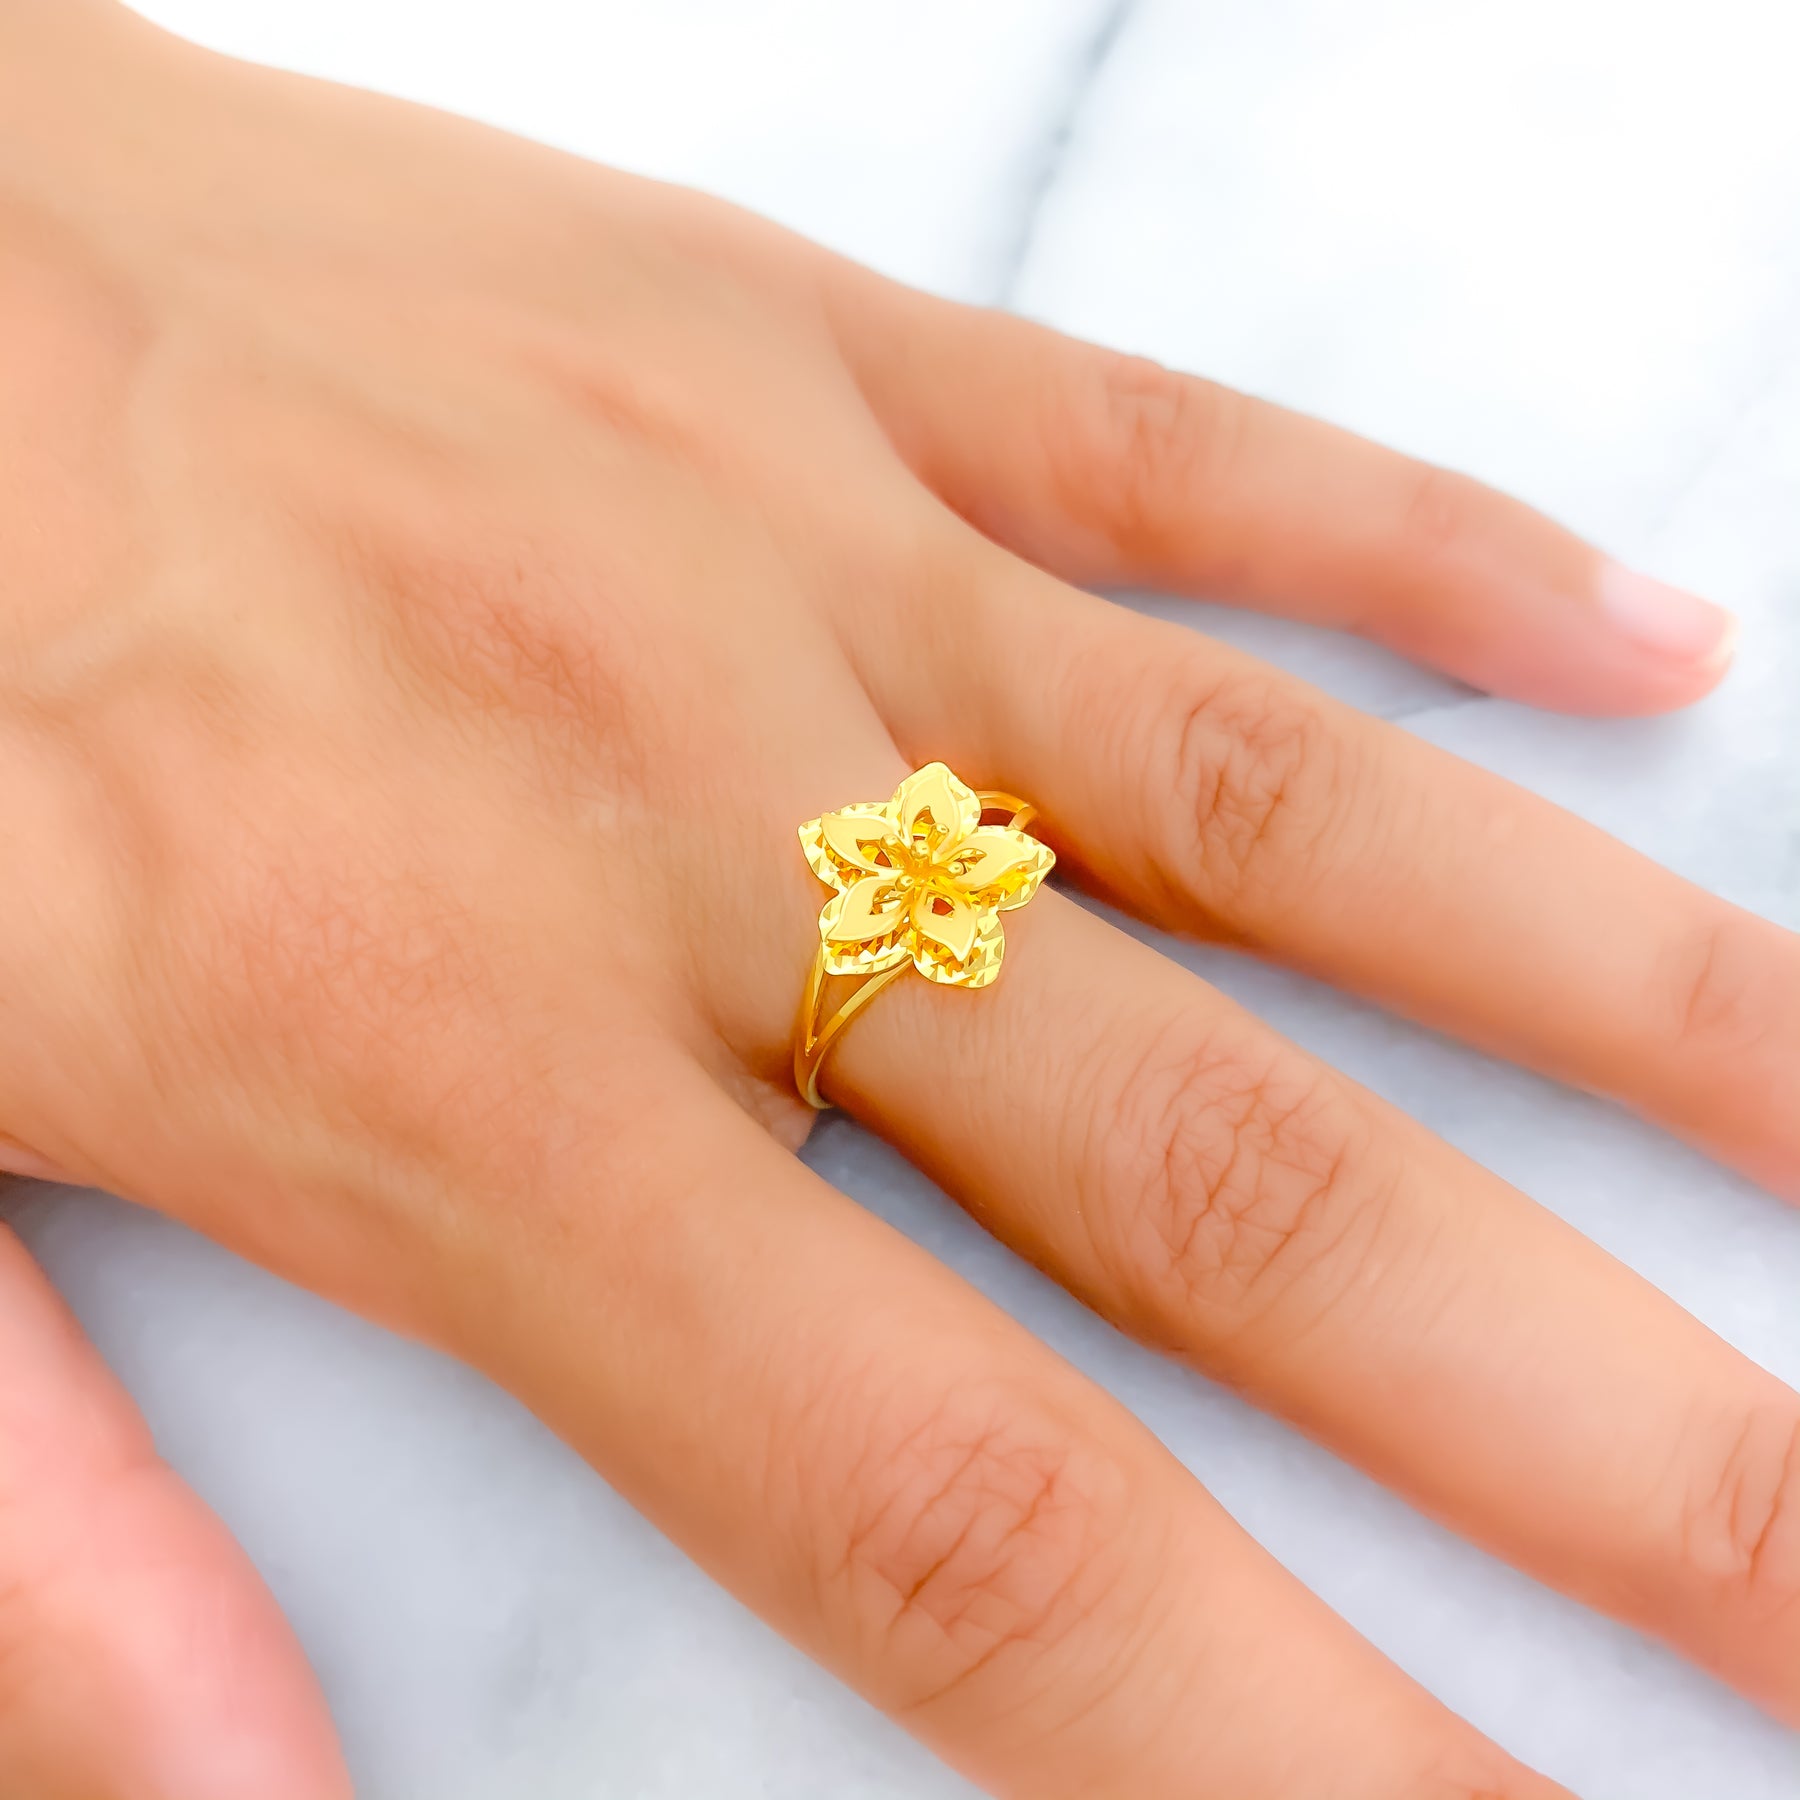 Chinese Wedding Collection 'Floral' 999.9 Gold Ring | Chow Sang Sang  Jewellery eShop | Pretty rings, Gold rings, Chinese wedding